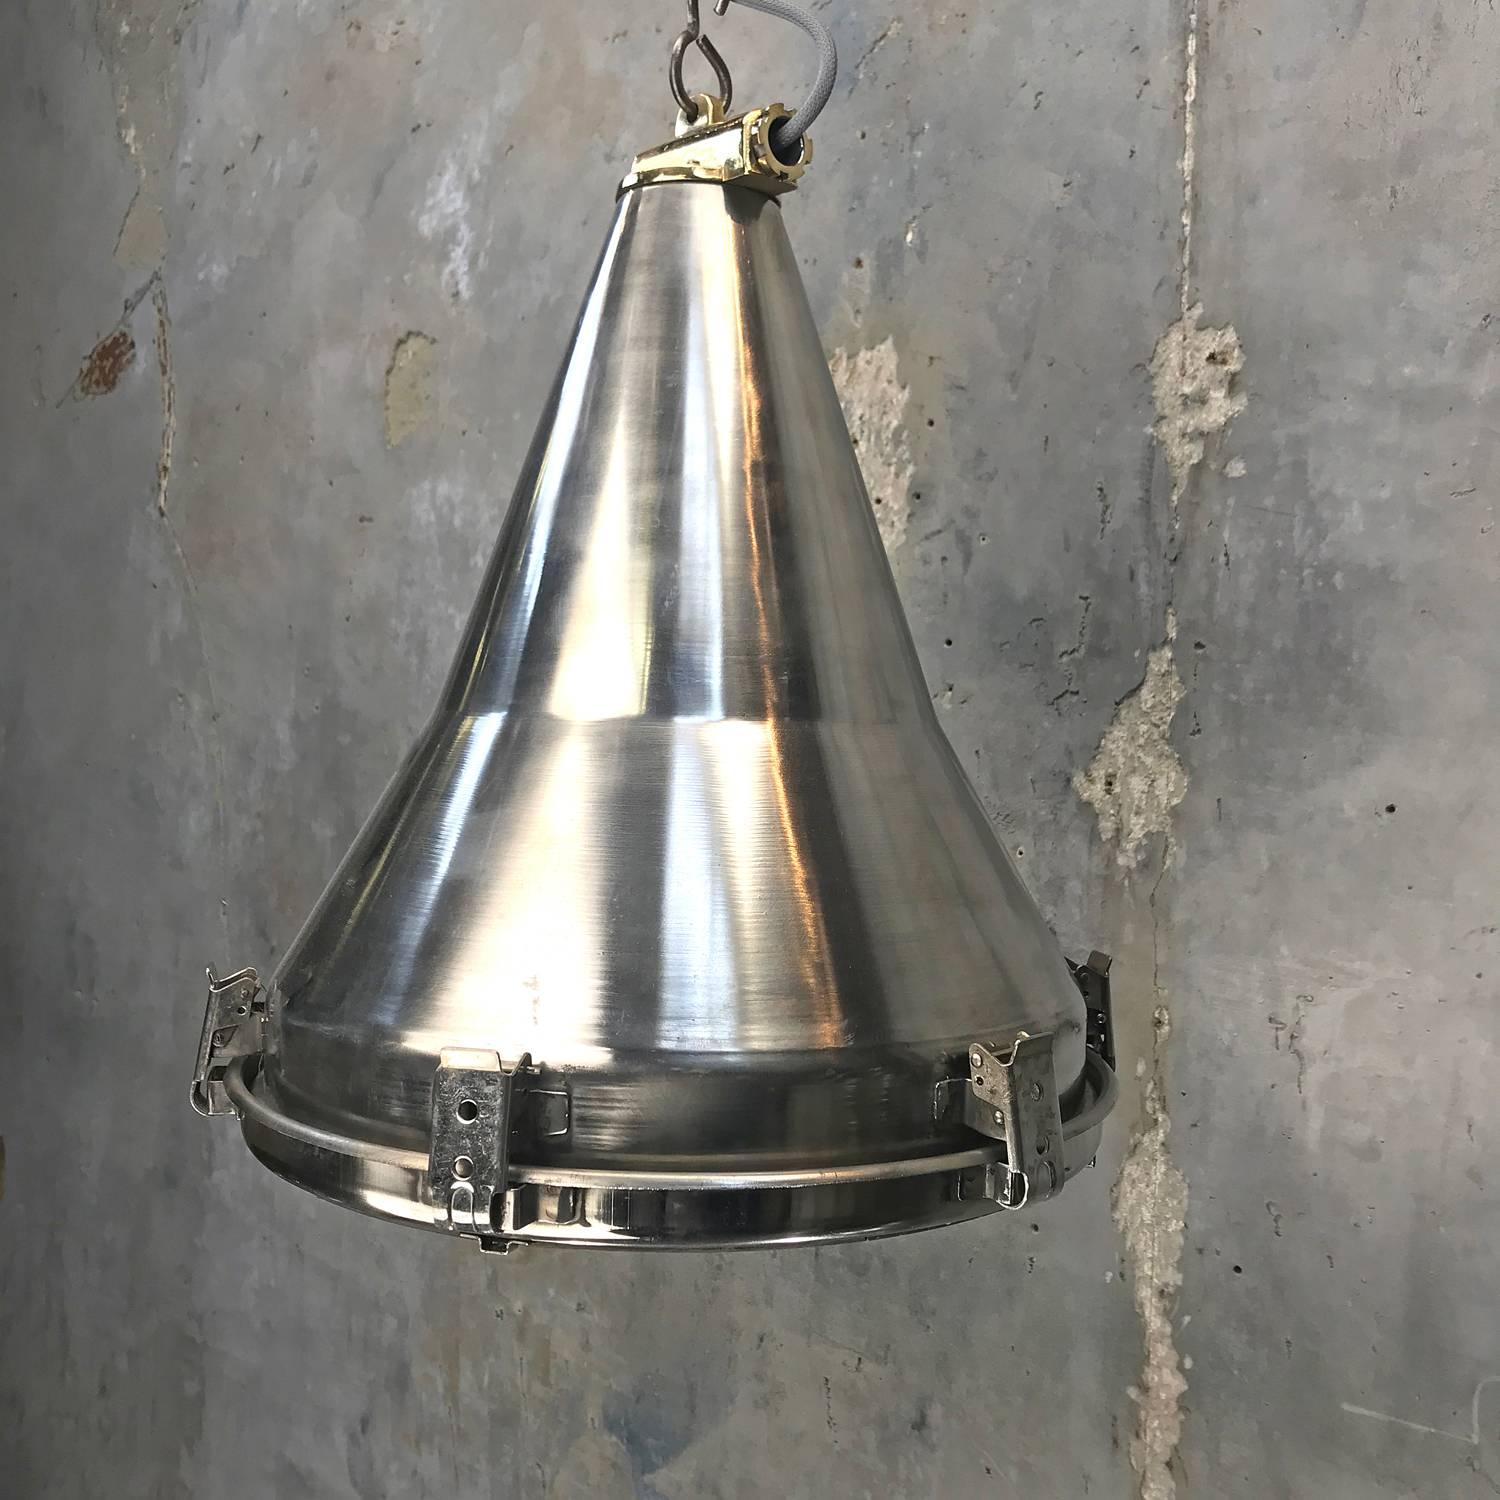 Late 20th Century Late Century Korean Stainless Steel, Brass and Glass Conical Flood Light Pendant